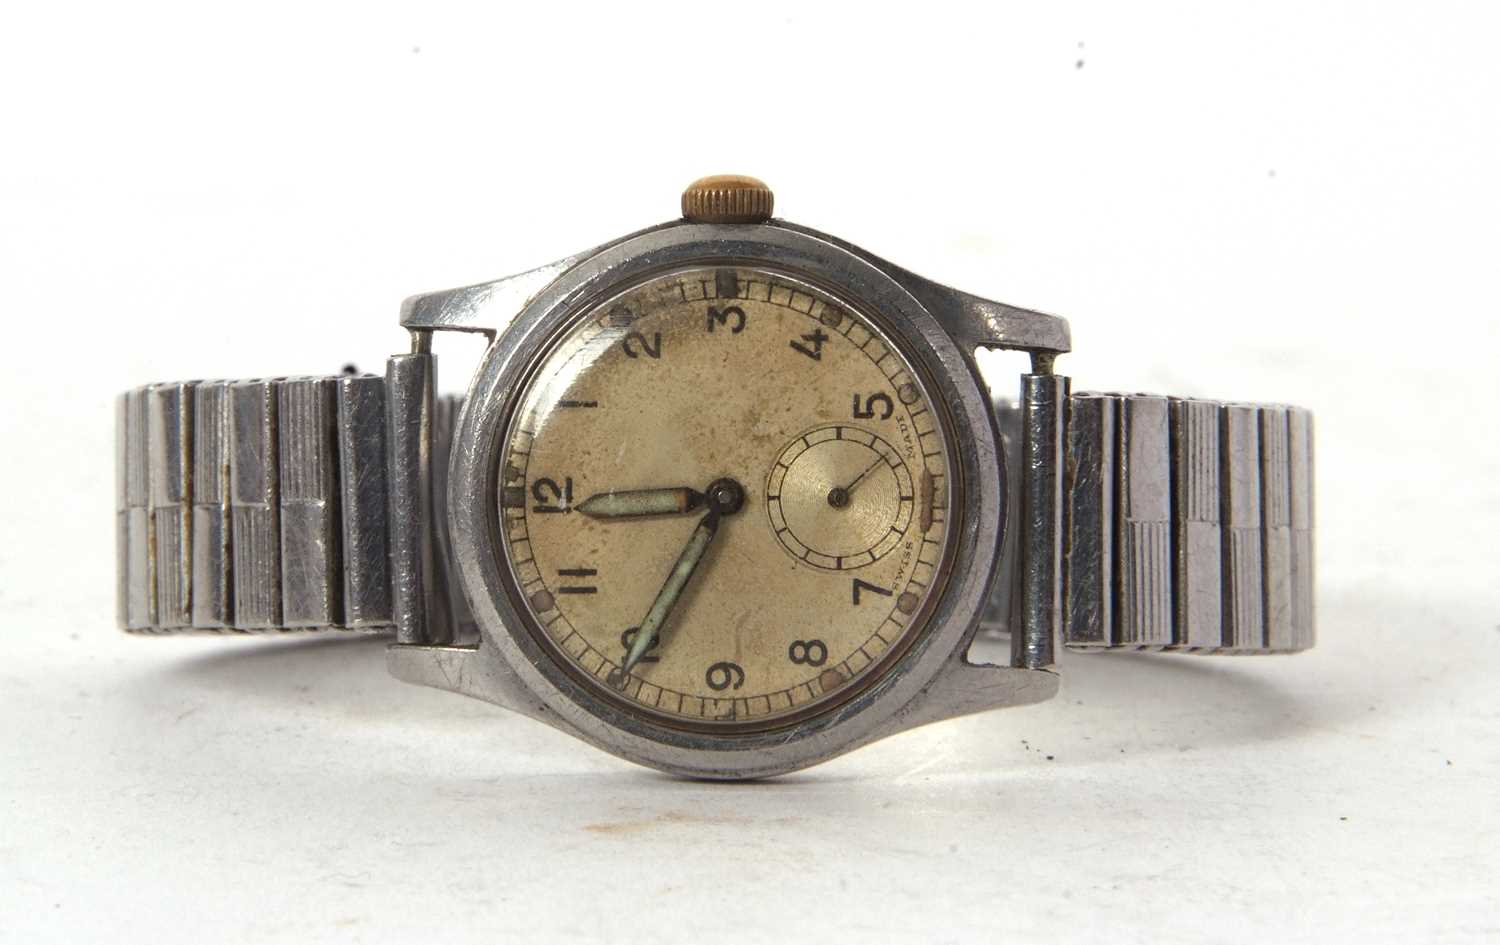 A vintage gents military wristwatch, the watch has a stainless steel case and expanding bracelet, it - Image 2 of 5